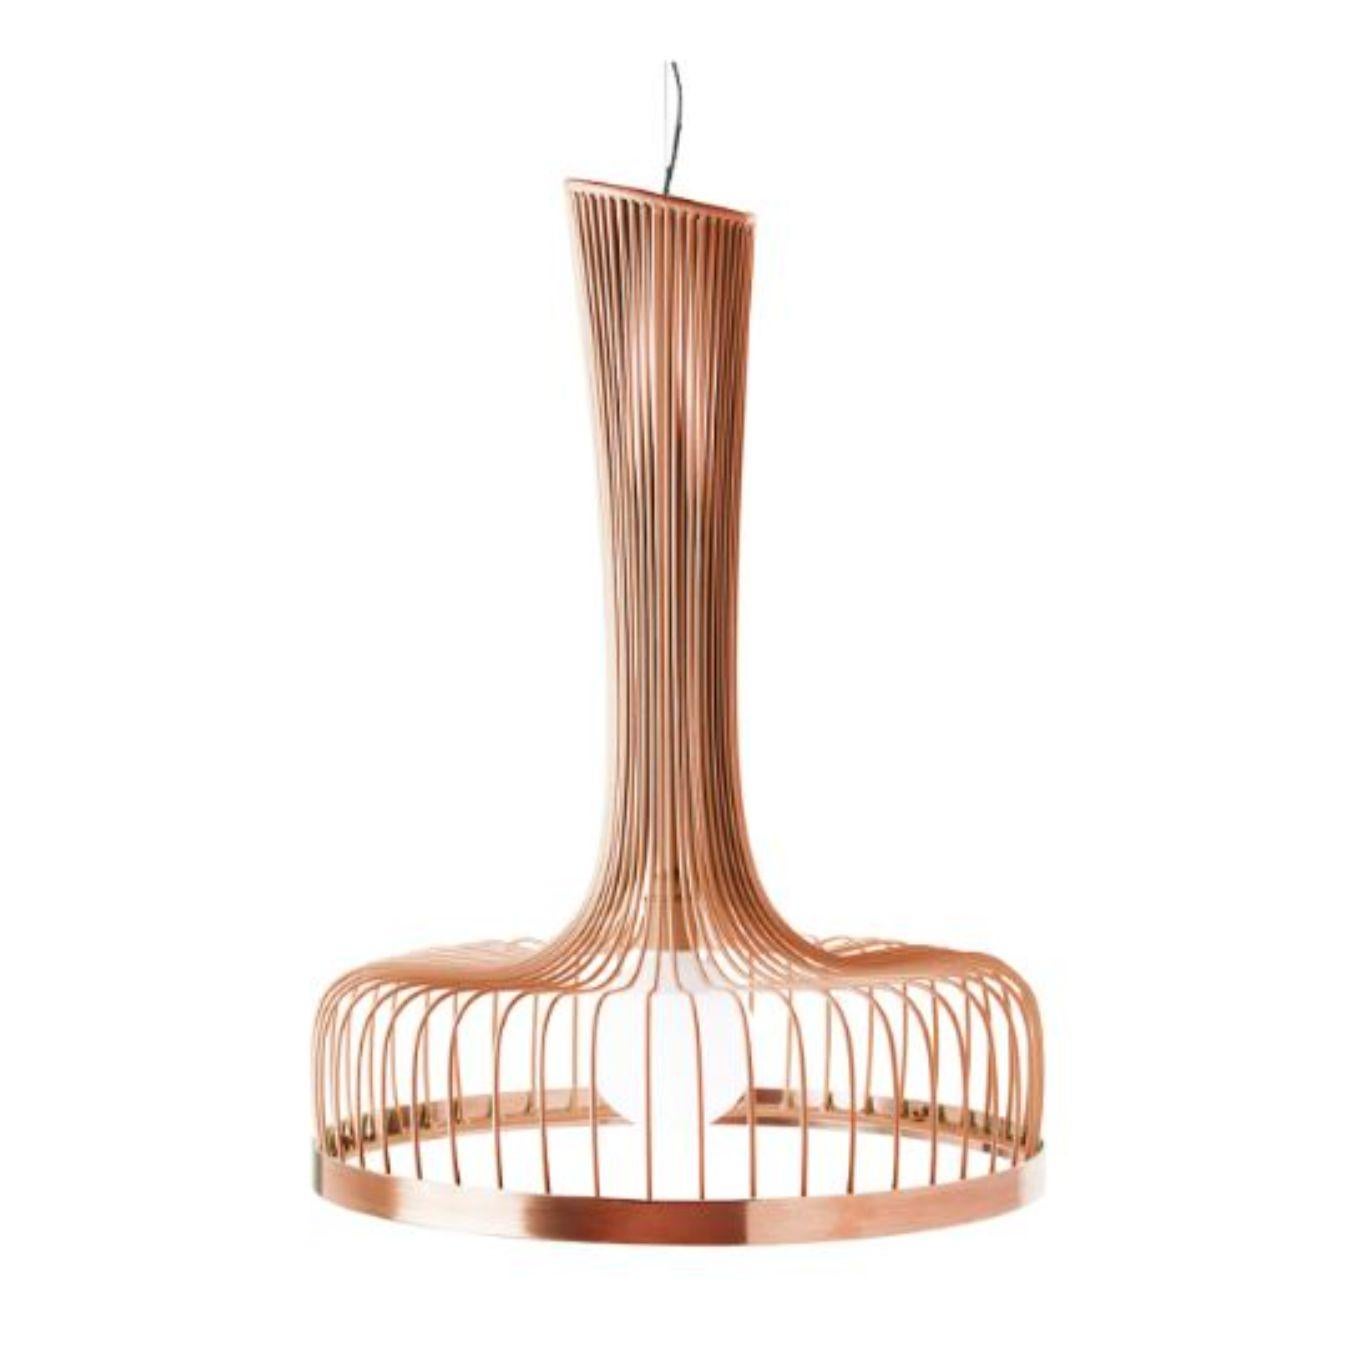 Salmon new spider I suspension lamp with copper ring by Dooq.
Dimensions: W 52 x D 52 x H 70 cm.
Materials: lacquered metal, polished or brushed metal, copper.
Also available in different colors and materials. 

Information:
230V/50Hz
E27/1x20W